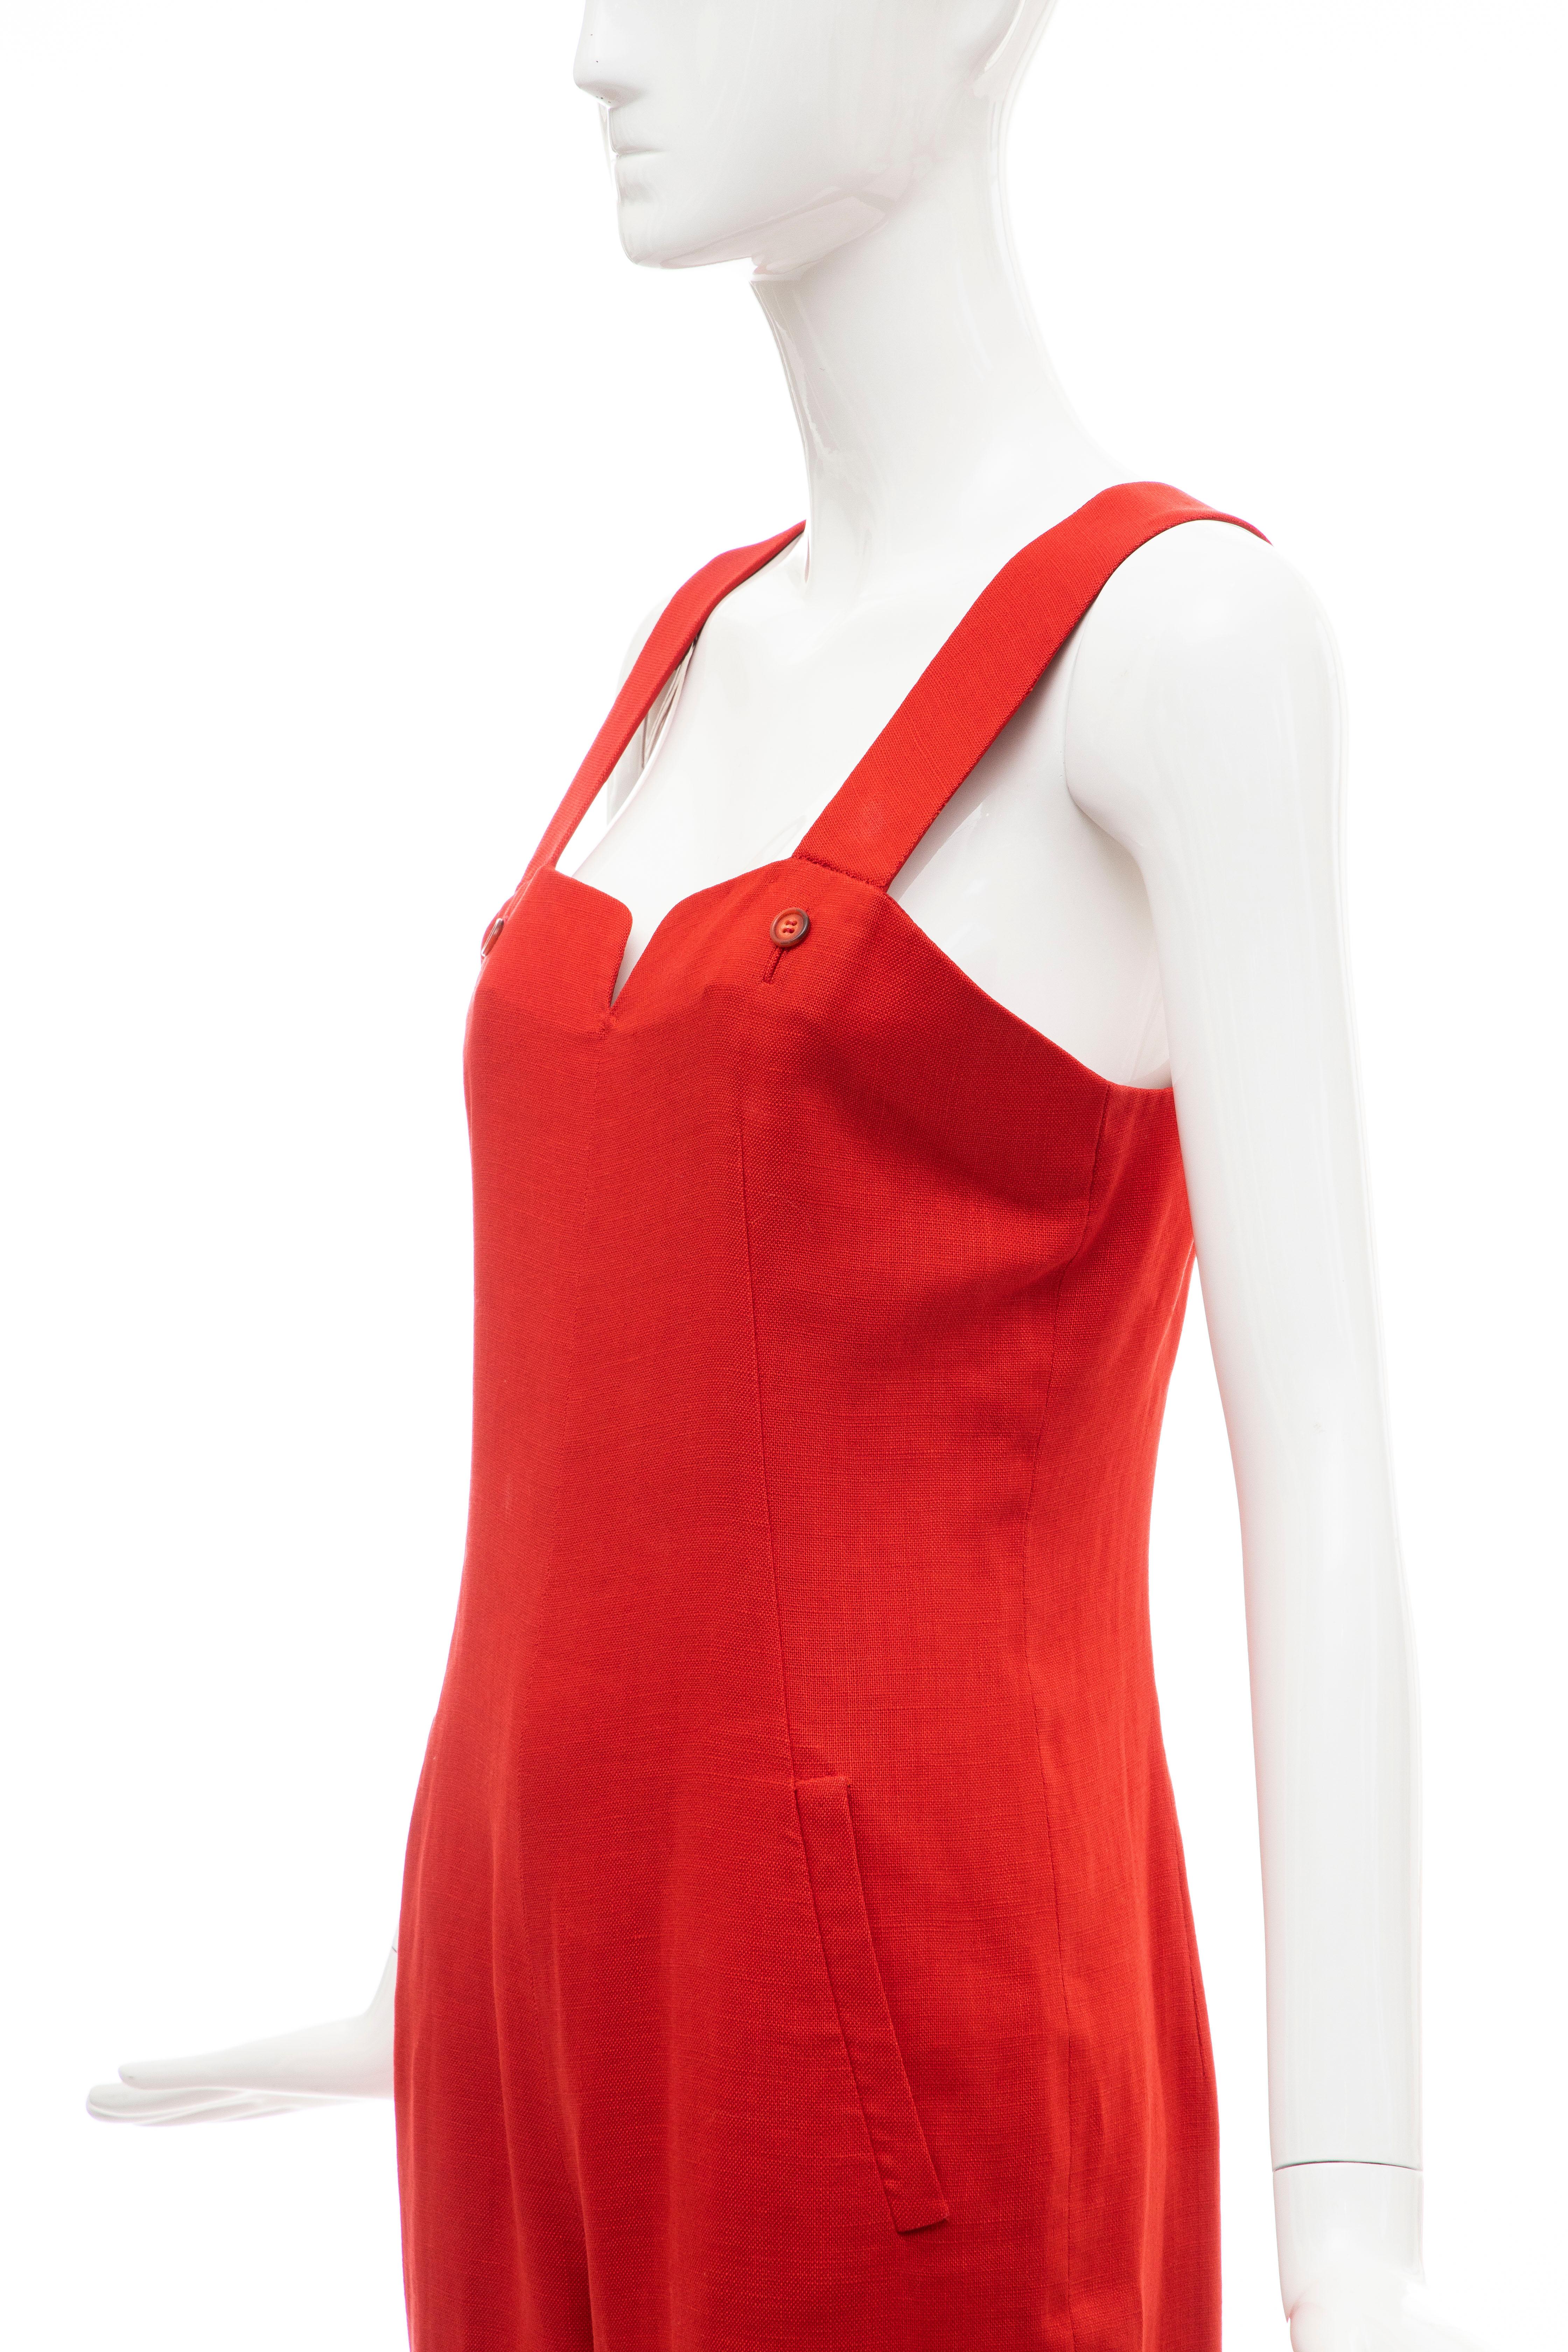 Geoffrey Beene Red Linen Jumpsuit Silk Lined With Jacket, Circa: 1970's For Sale 13